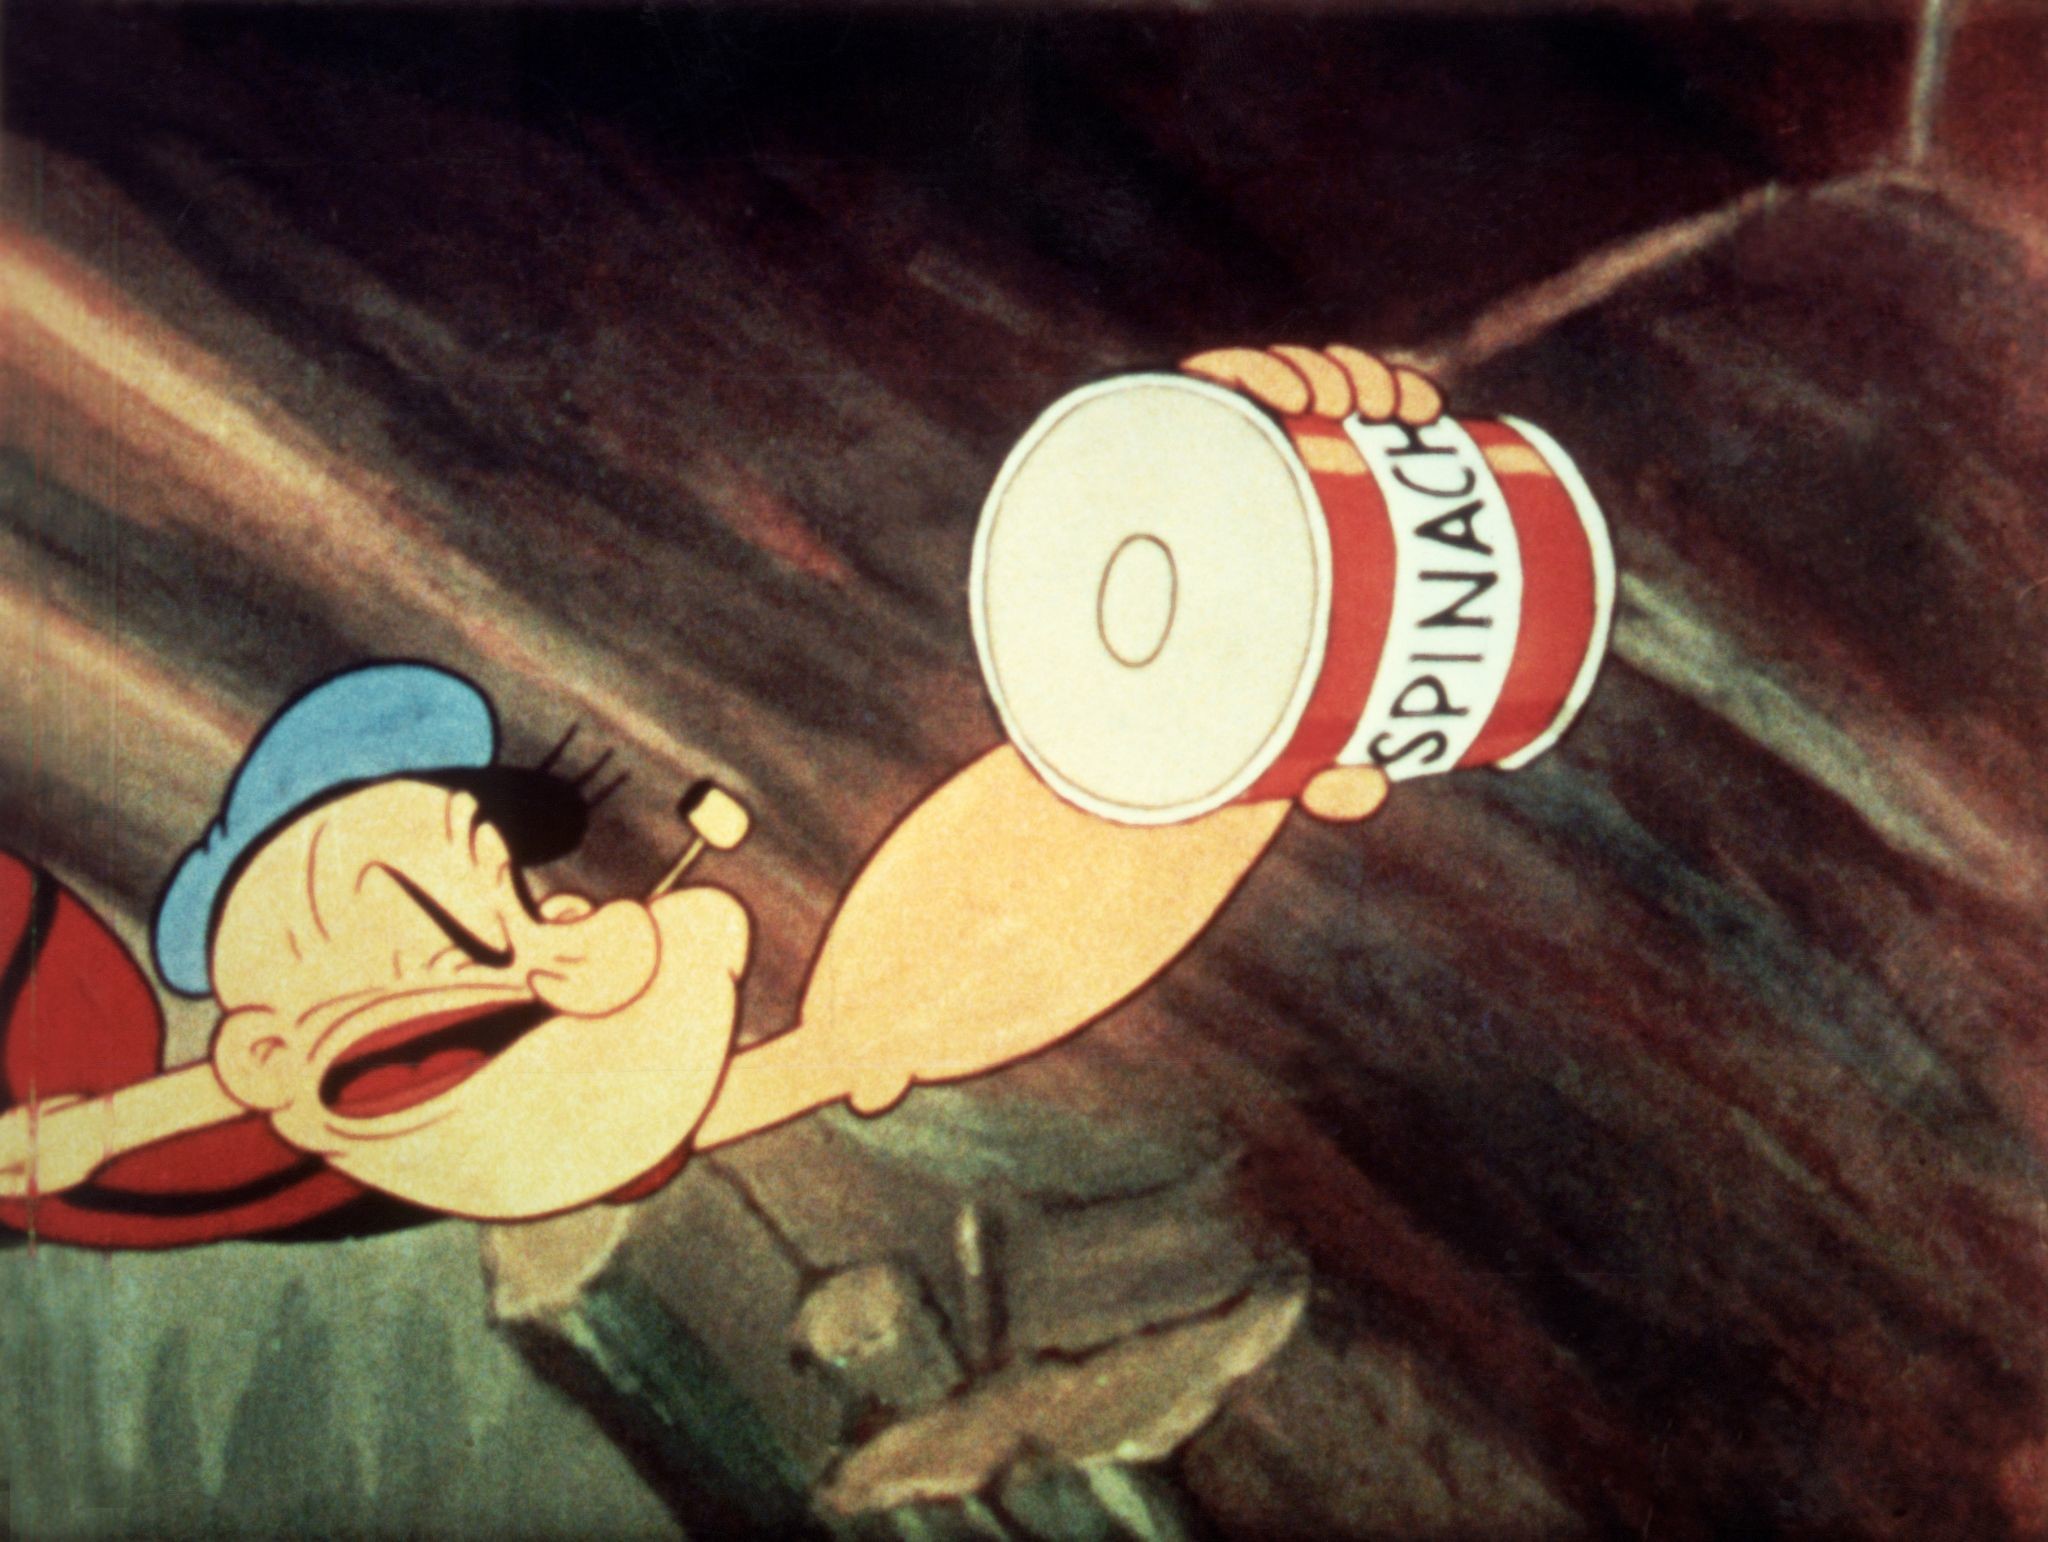 2048x1542 Today in 1929, Popeye the Sailor Man debuted in Victoria, Texas - Houston  Chronicle